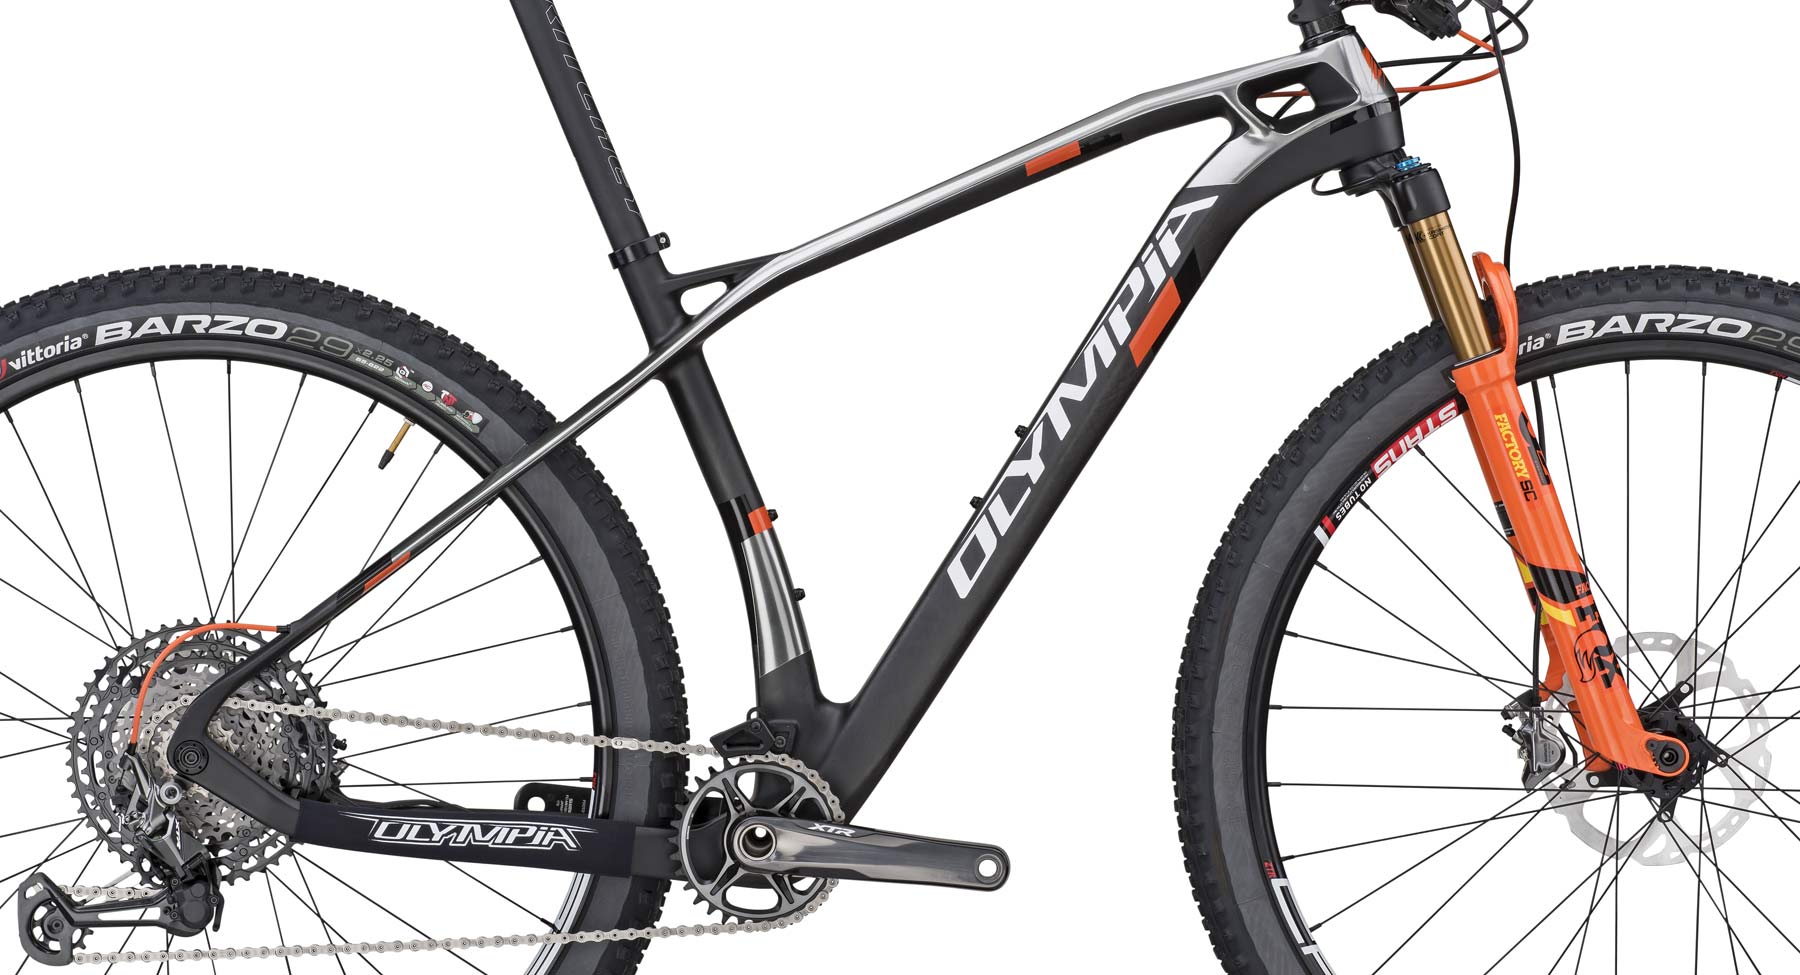 2019 Olympia F1 limited edition carbon XC race-ready hardtail mountain bike